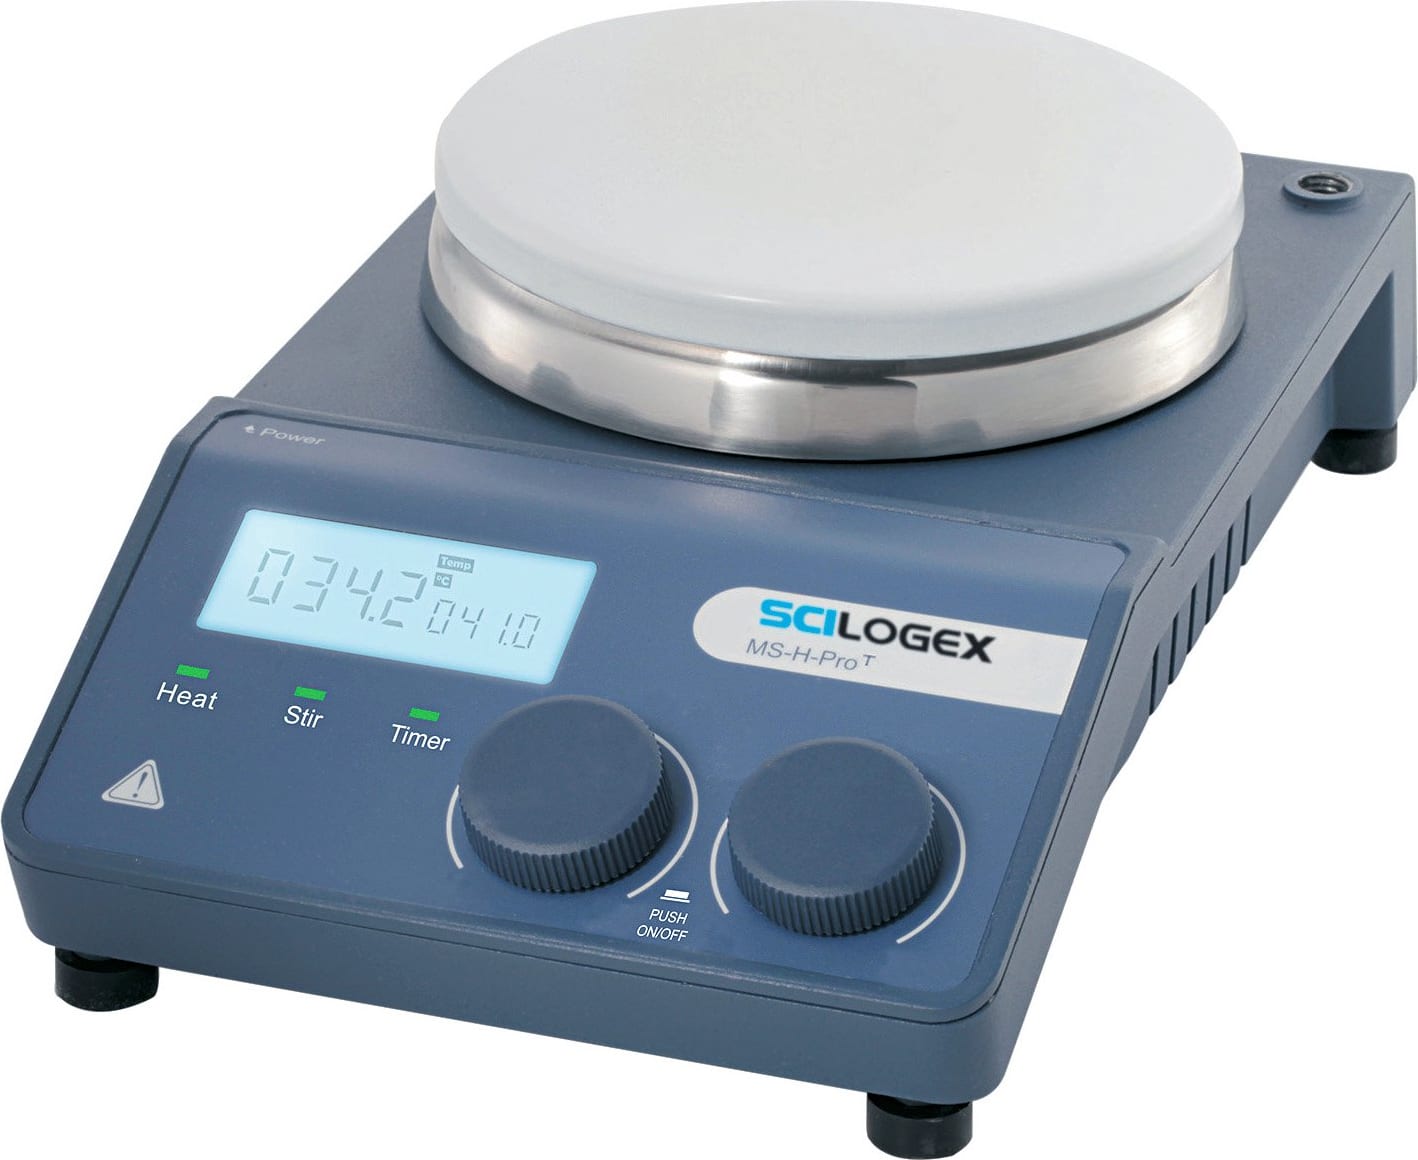 Scilogex MS-H-ProT Circular LCD Digital Magnetic Hotplate Stirrer with Timer